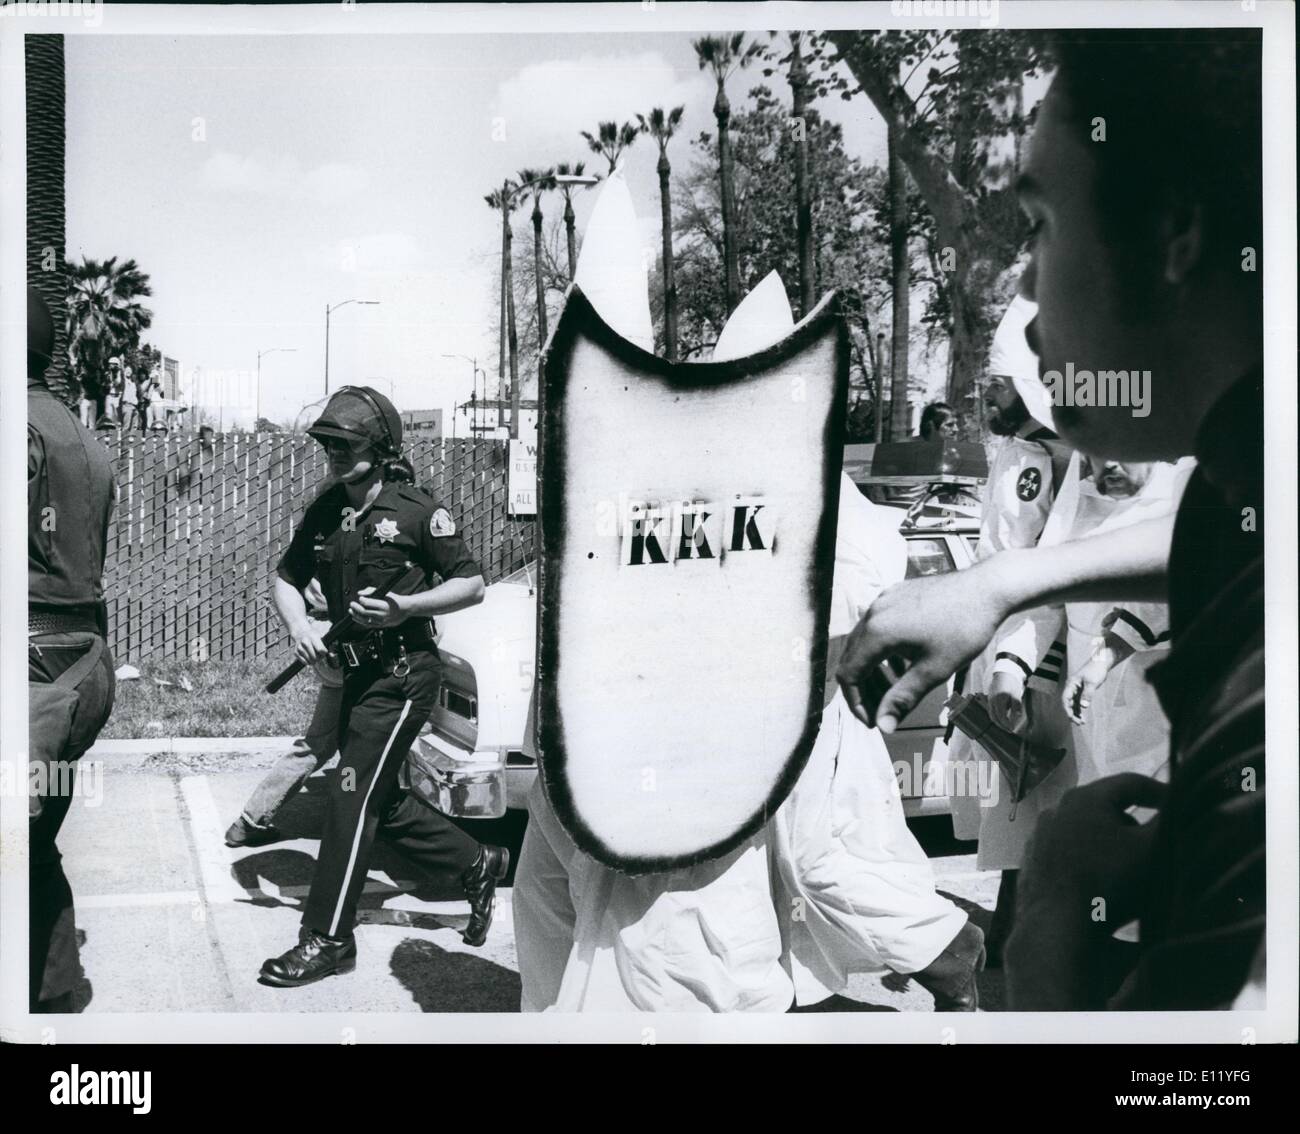 Apr. 04, 1981 - Klansmen Shield themselves from the angry, rock-throwing crowd, who forced the Klan to cancel the scheduled recruitment rally in San Jose, California. Stock Photo